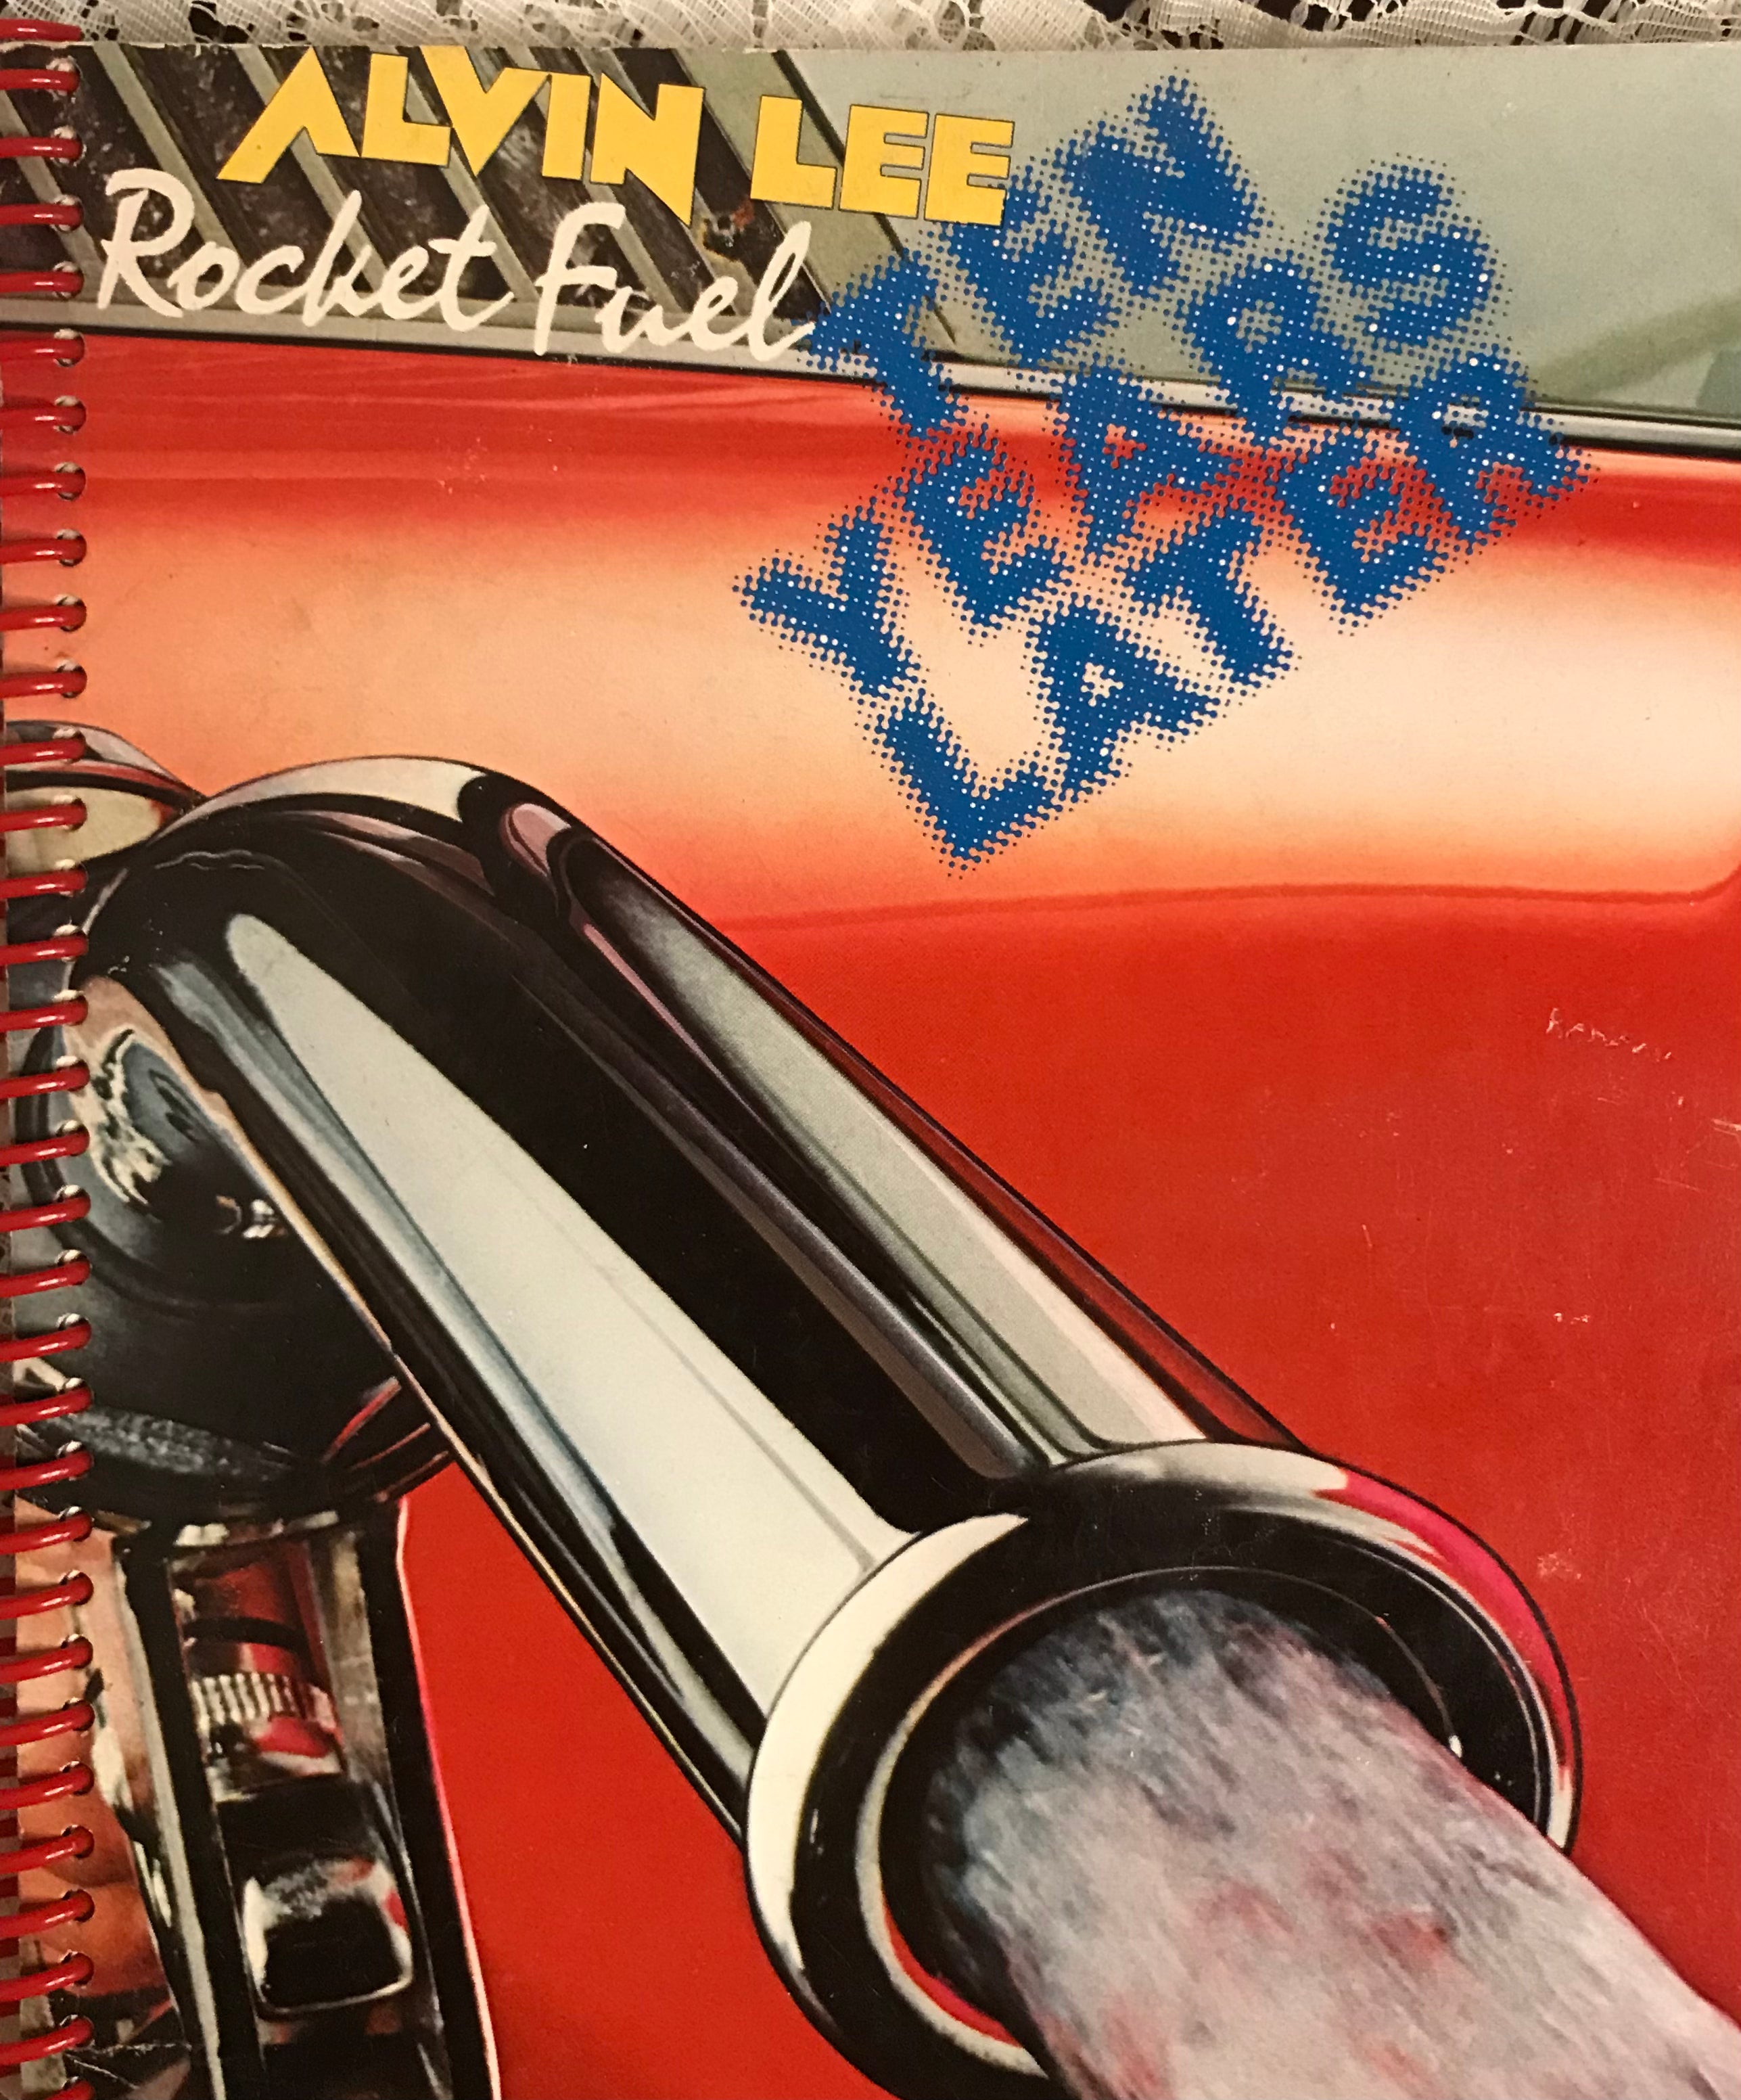 Alvin Lee and Ten Years Later Album Cover Notebook